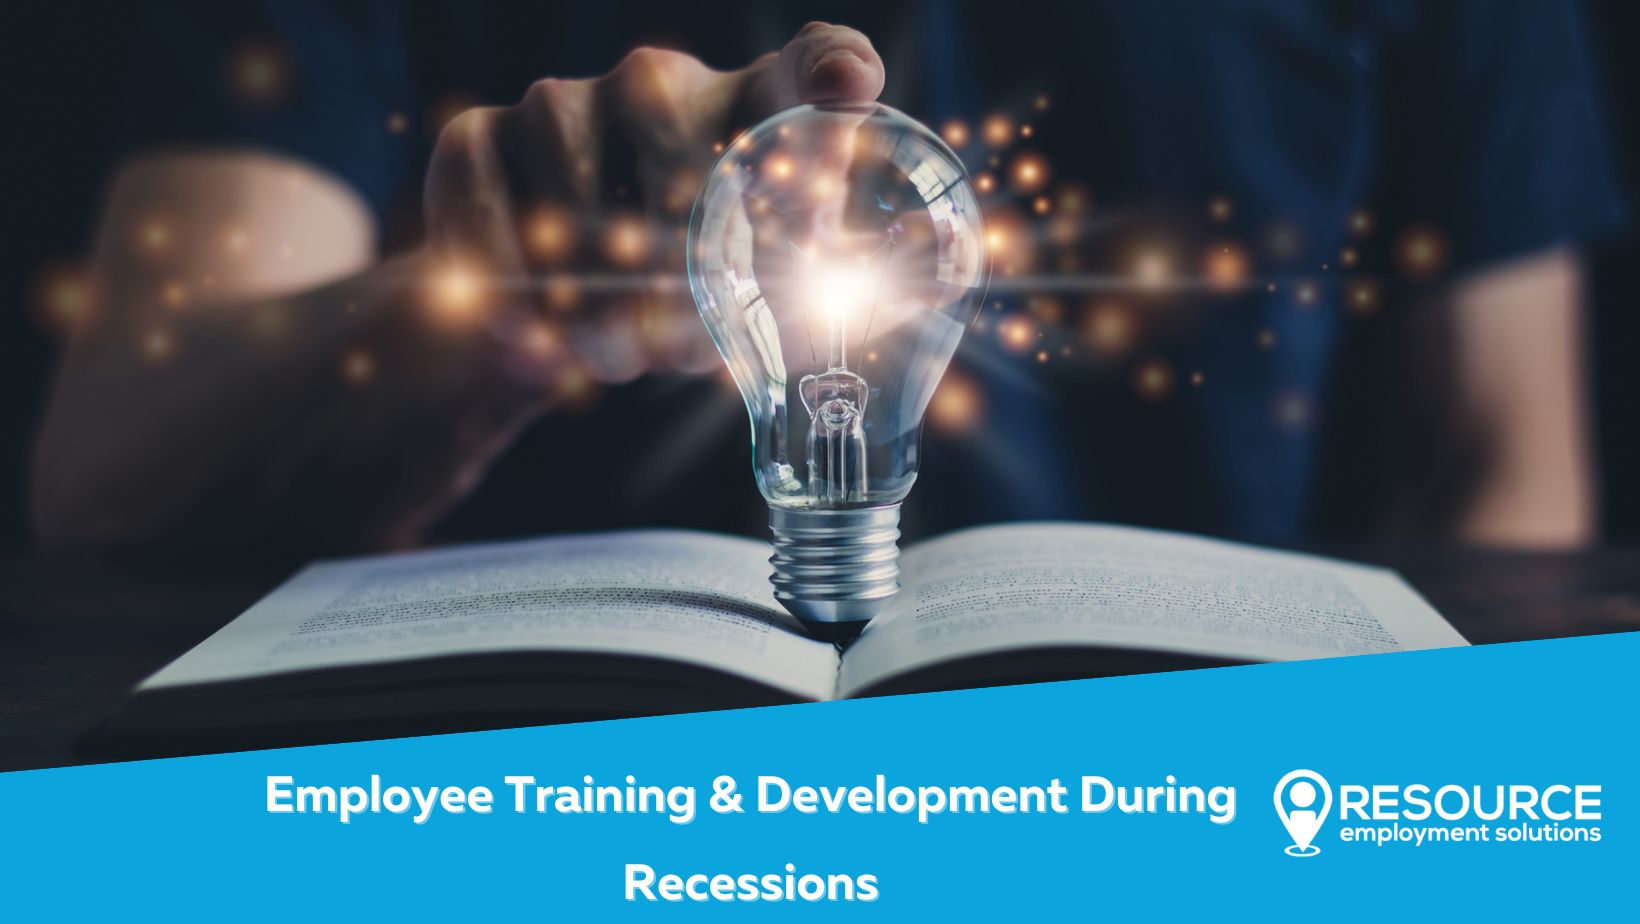 Employee Training & Development During Recessions